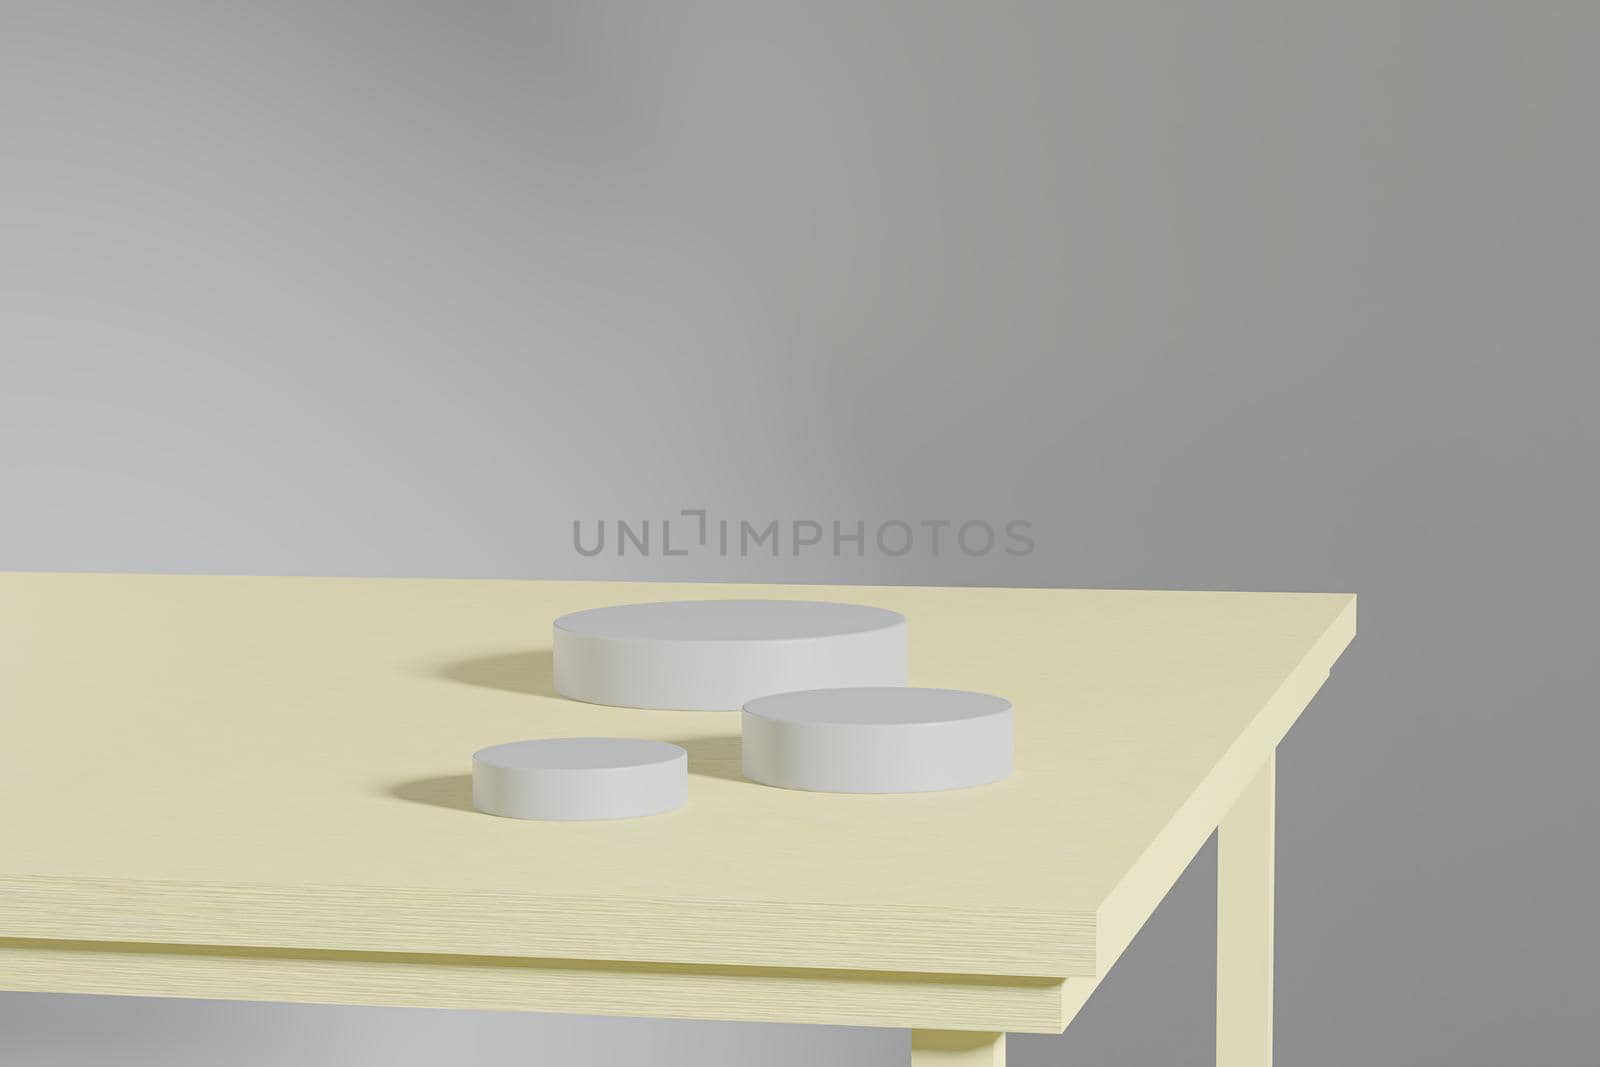 Grey cylinder stand or pedestal for products on yellow wooden table. 3D rendering in minimal style.